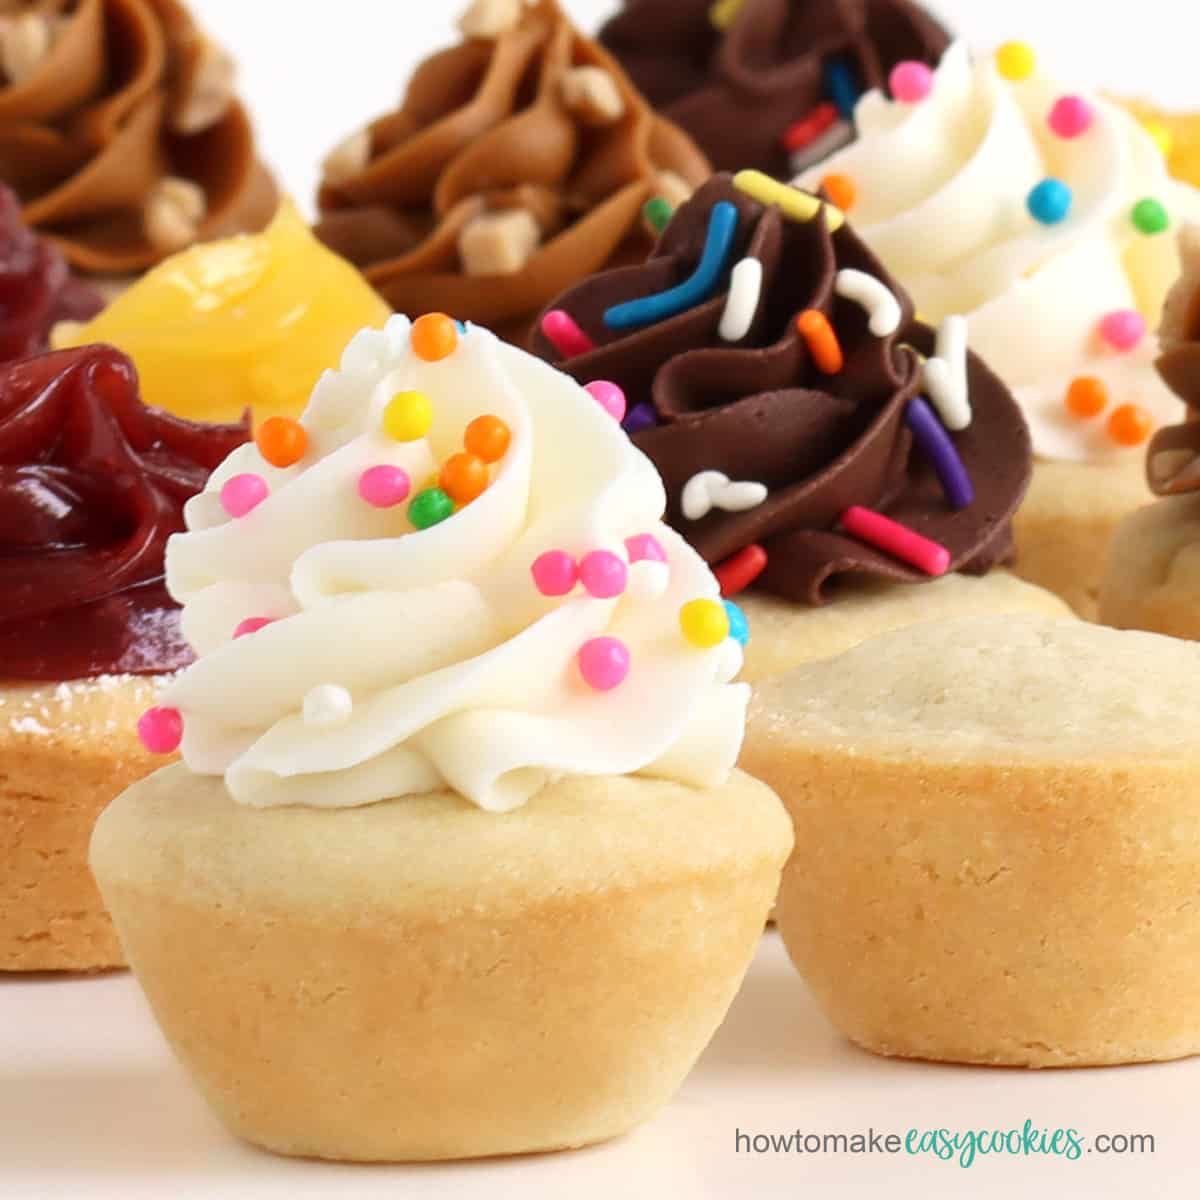 Sugar cookie cups topped with swirls of vanilla frosting with colorful Crispearls, chocolate frosting with rainbow sprinkles, lemon curd, cherry curd, and Biscoff spread.